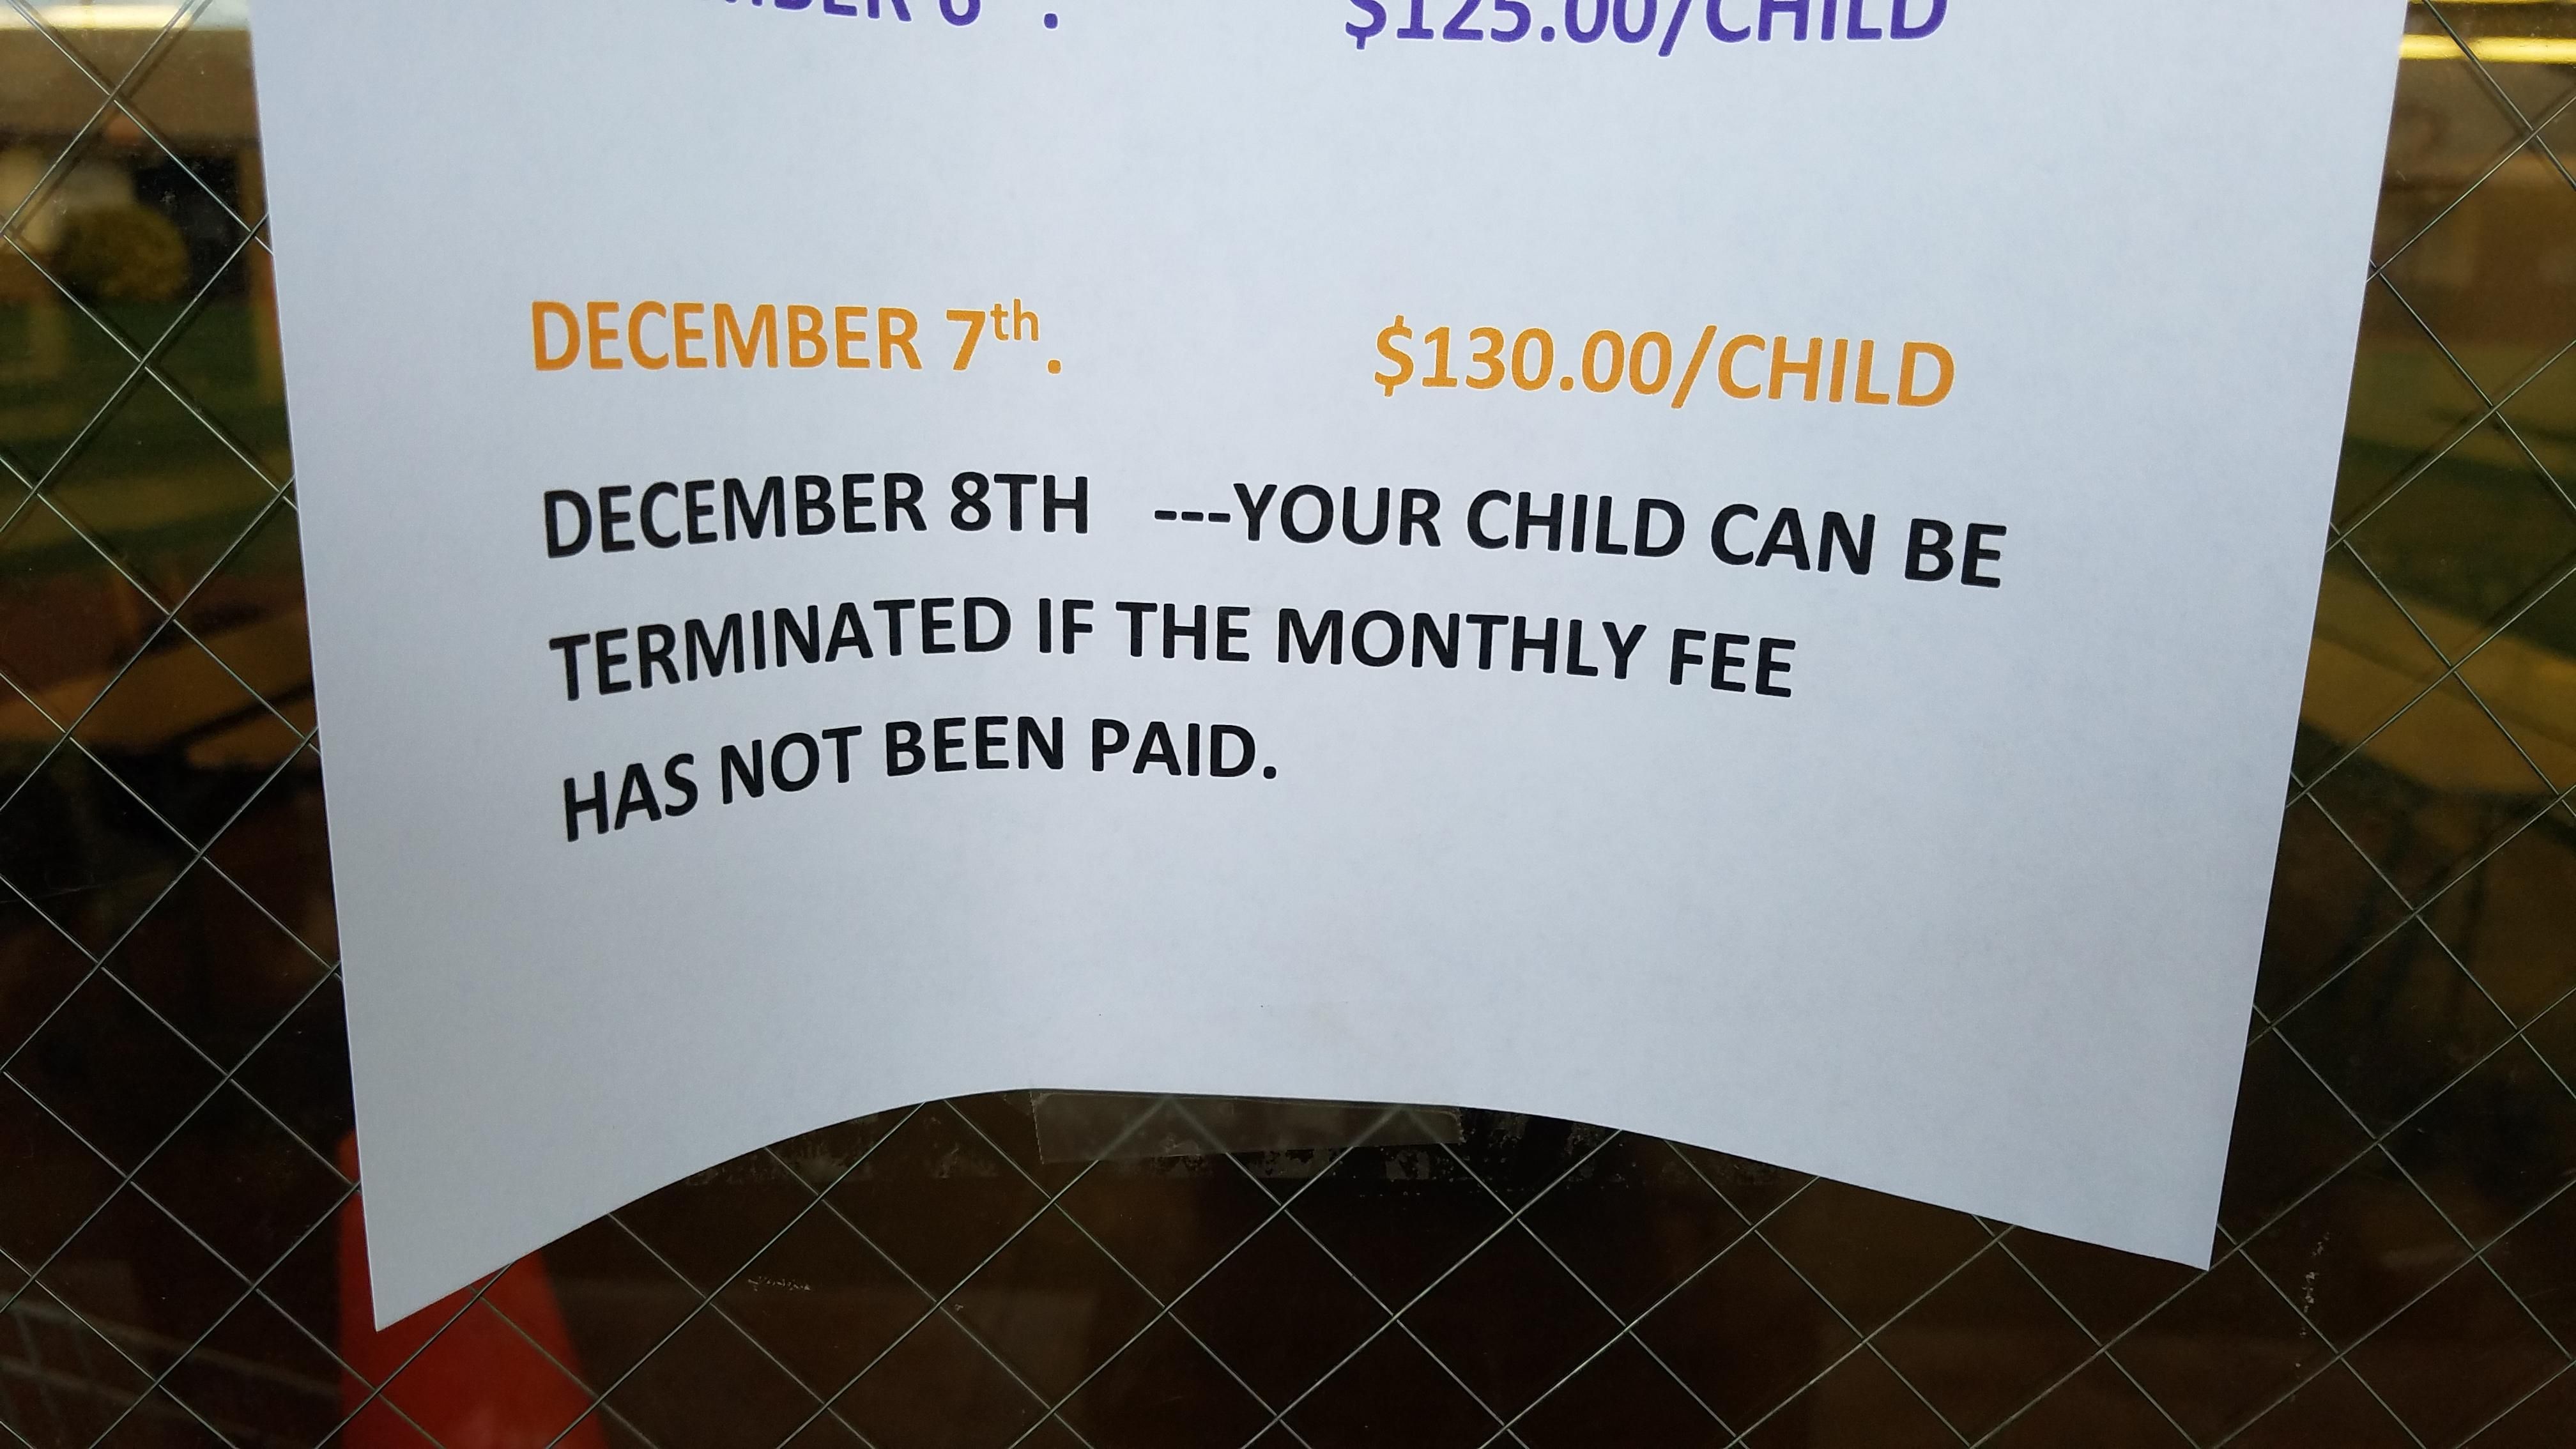 poster - Litu. 125.00Child December 7th $130.00Child December 8TH Your Child Can Be Terminated If The Monthly Fee Has Not Been Paid.